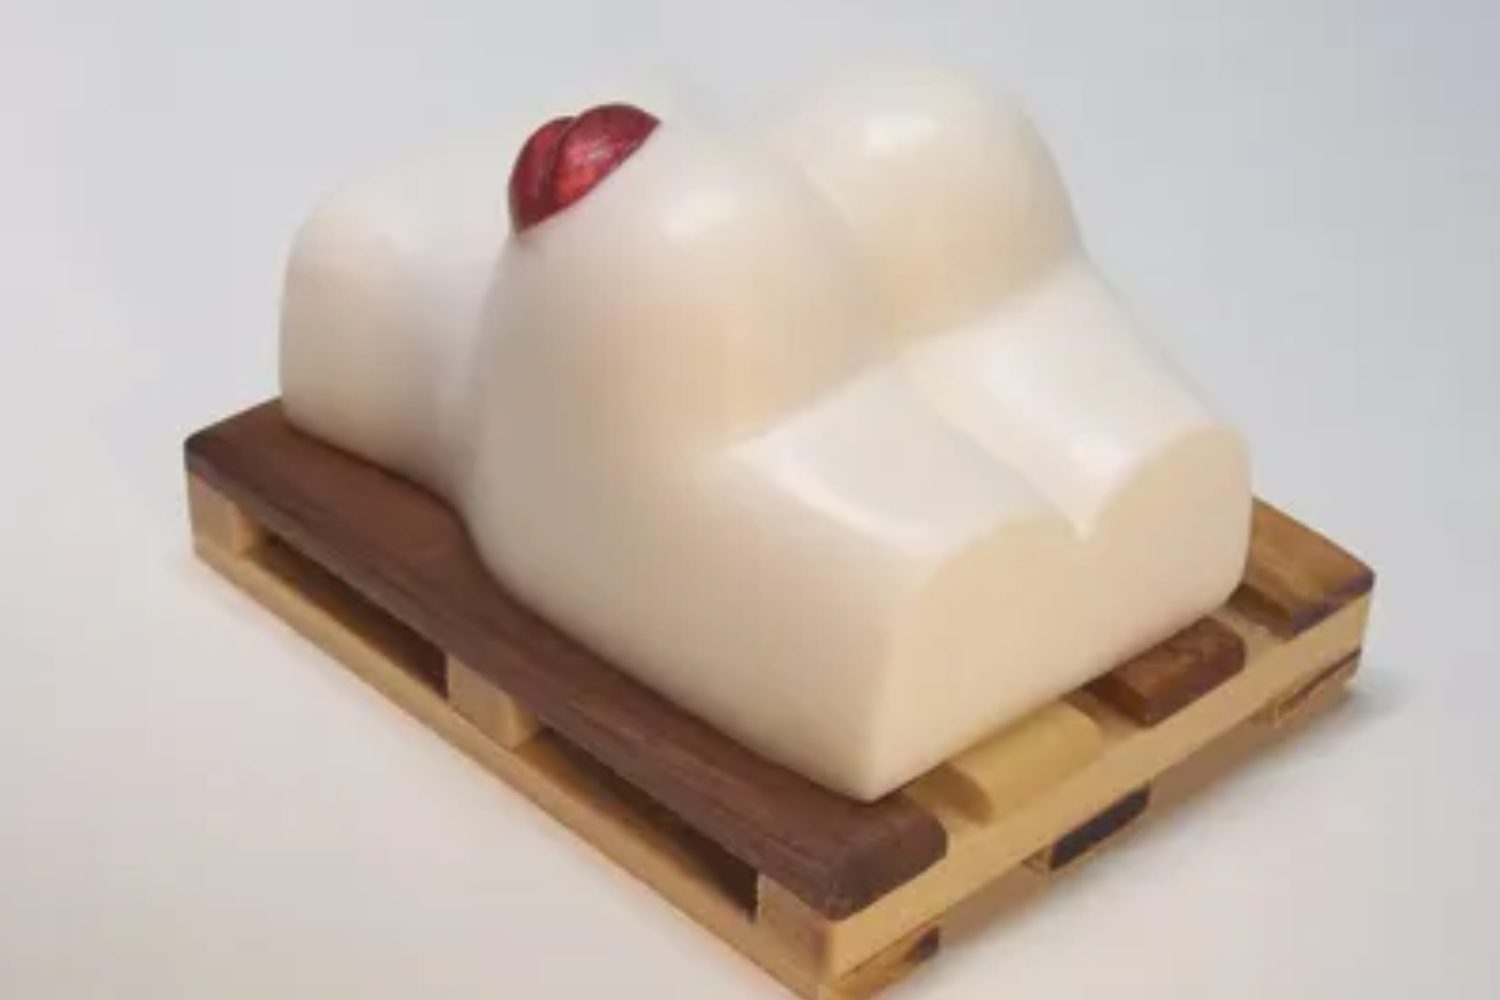 A soap on top of a wooden pallet.